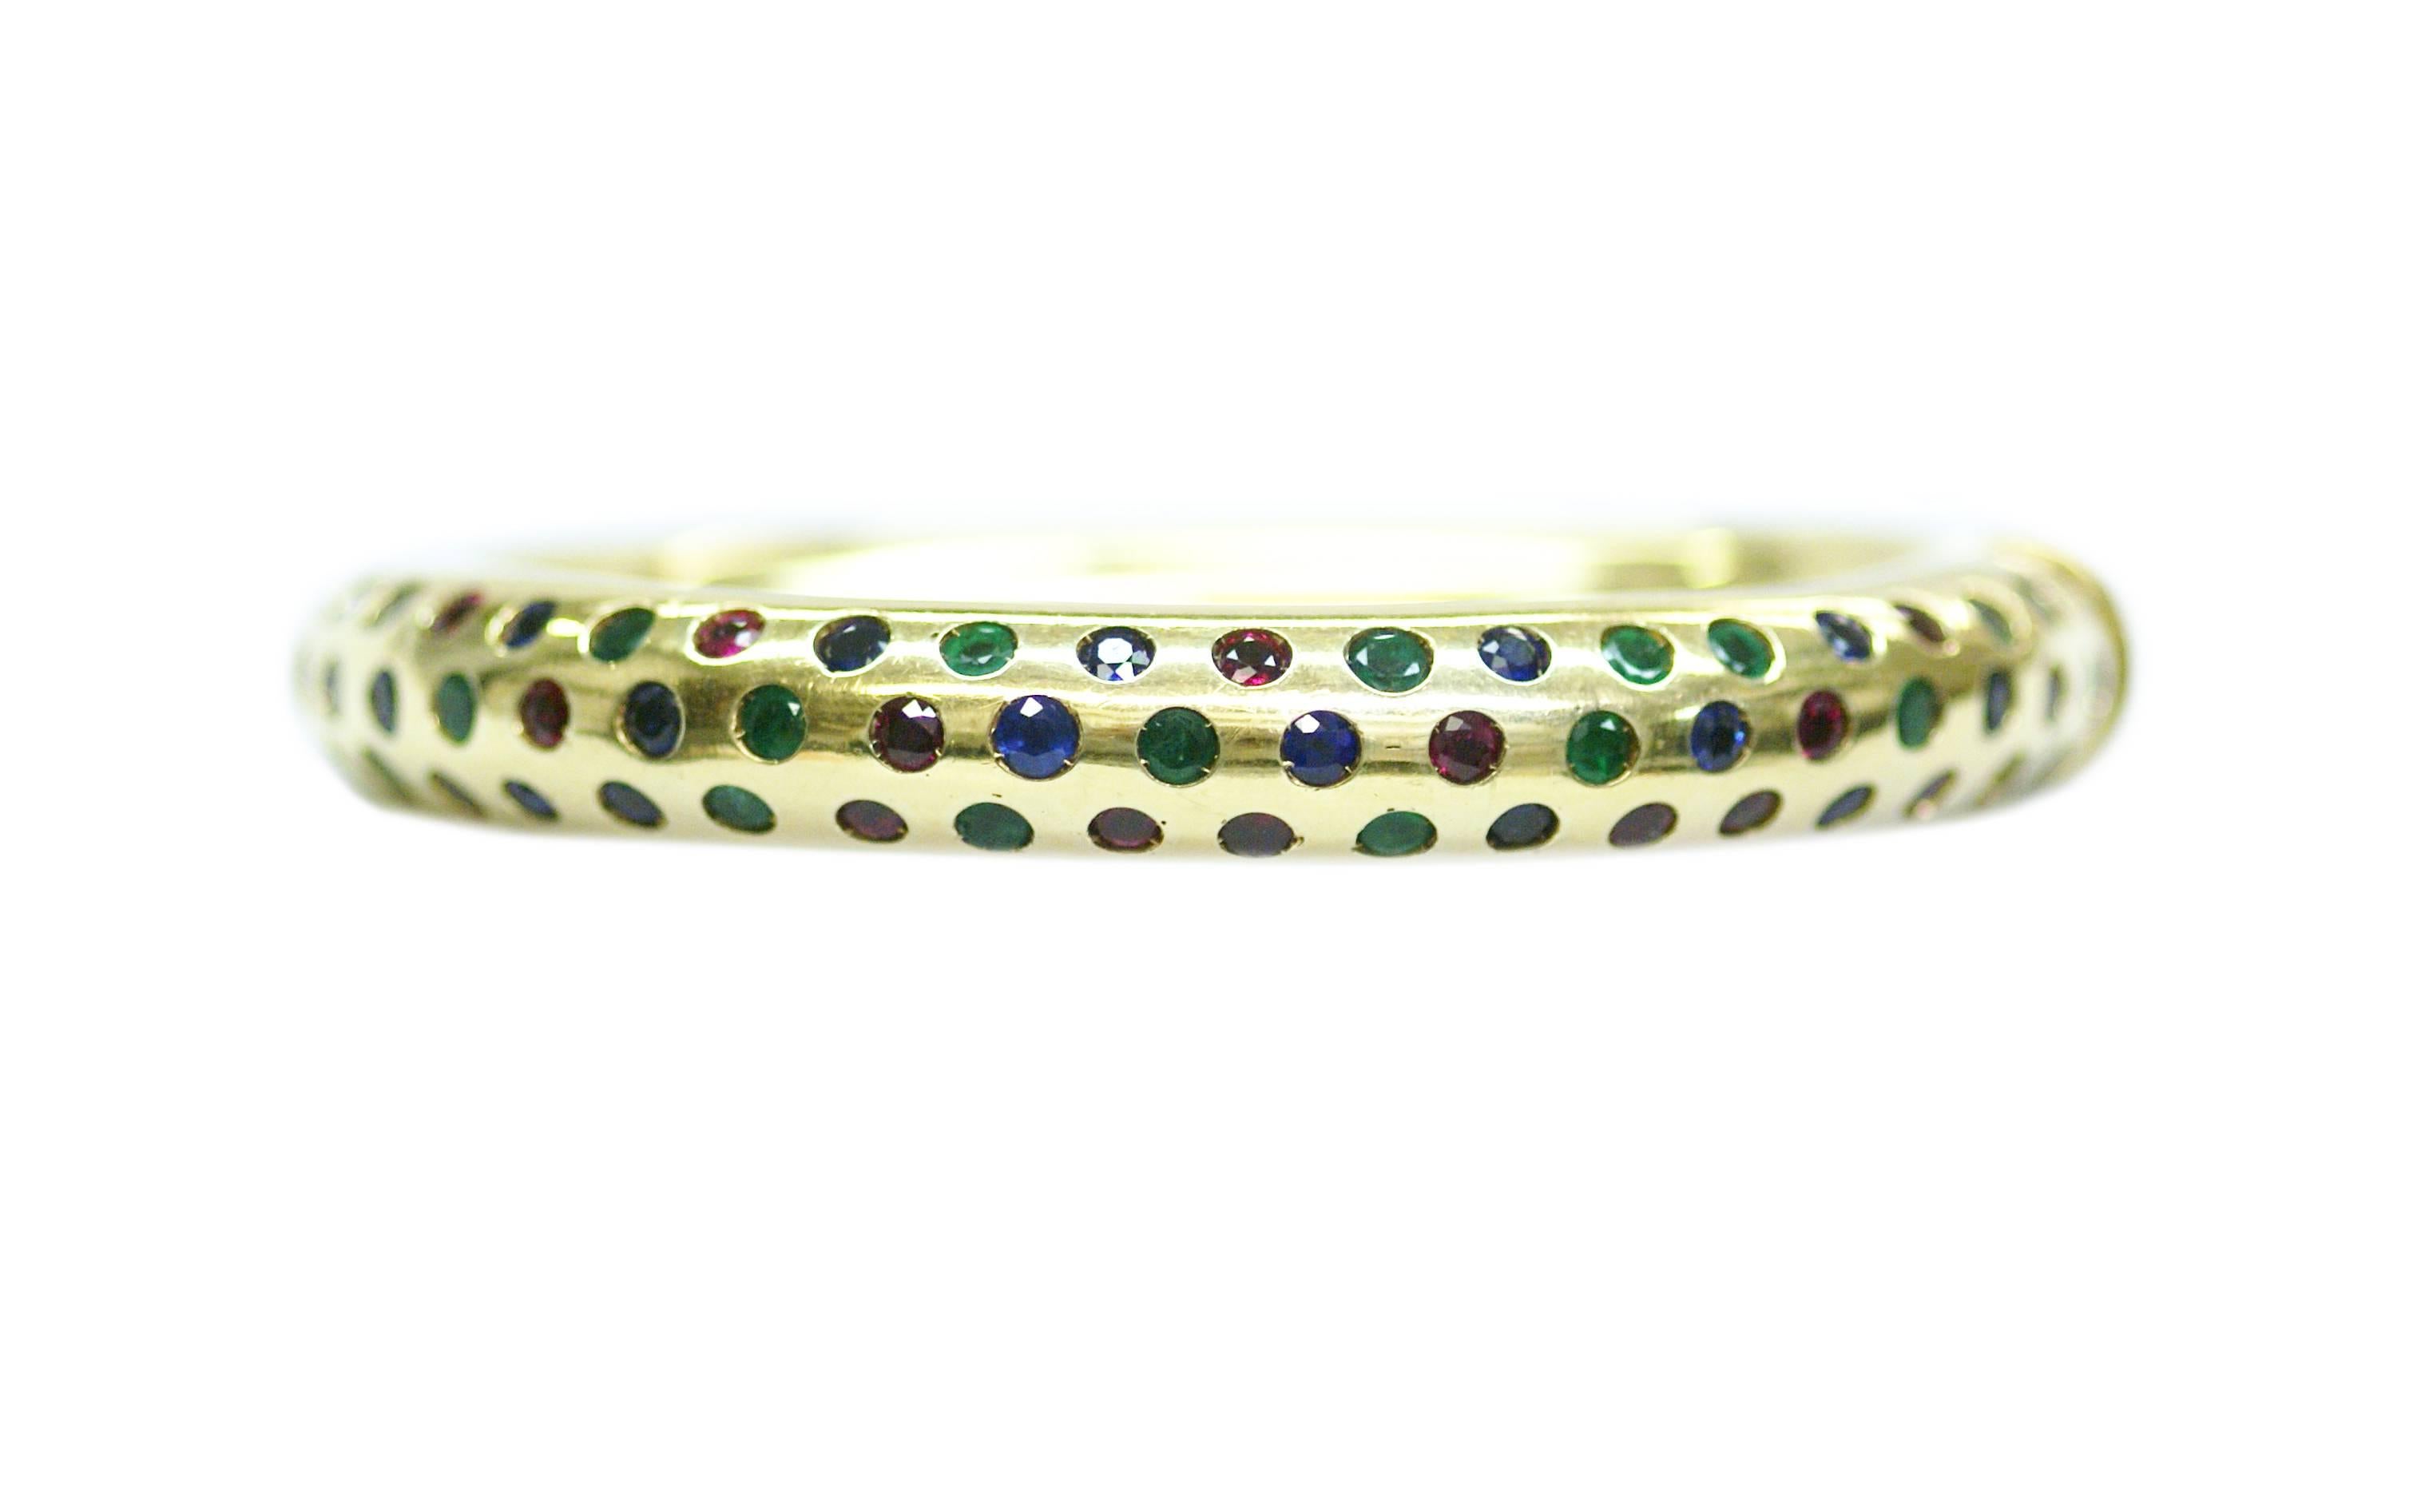 A finely crafted 18k gold bangle, highlighted by round cut sapphires, emeralds and rubies. Italy, circa 1975